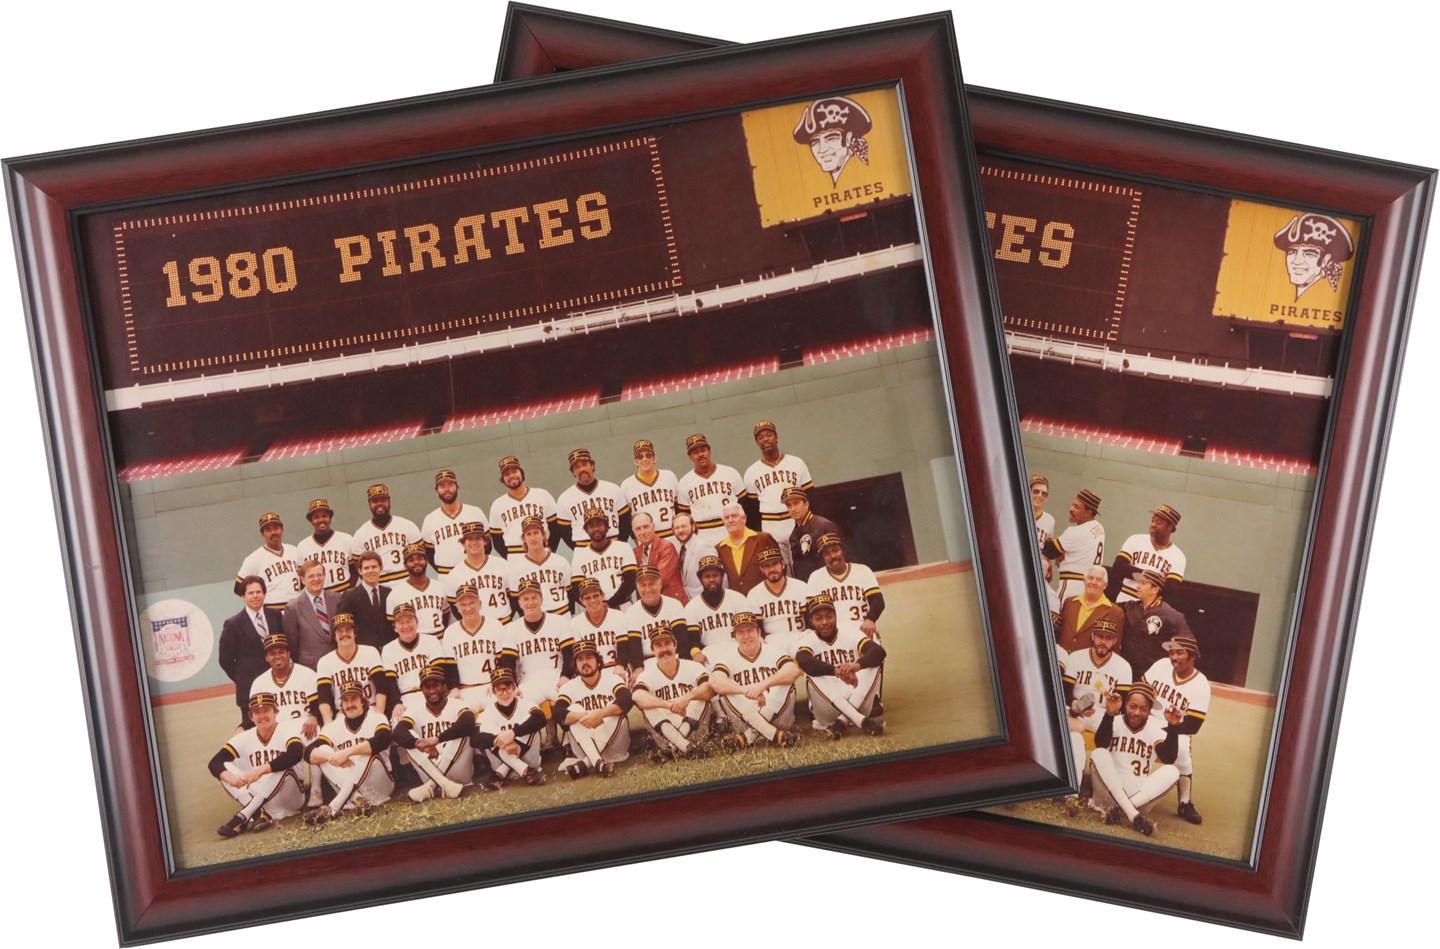 Clemente and Pittsburgh Pirates - 1980 Pittsburgh Pirates "Obscene" and Regular Large-Format Team Photographs (2)